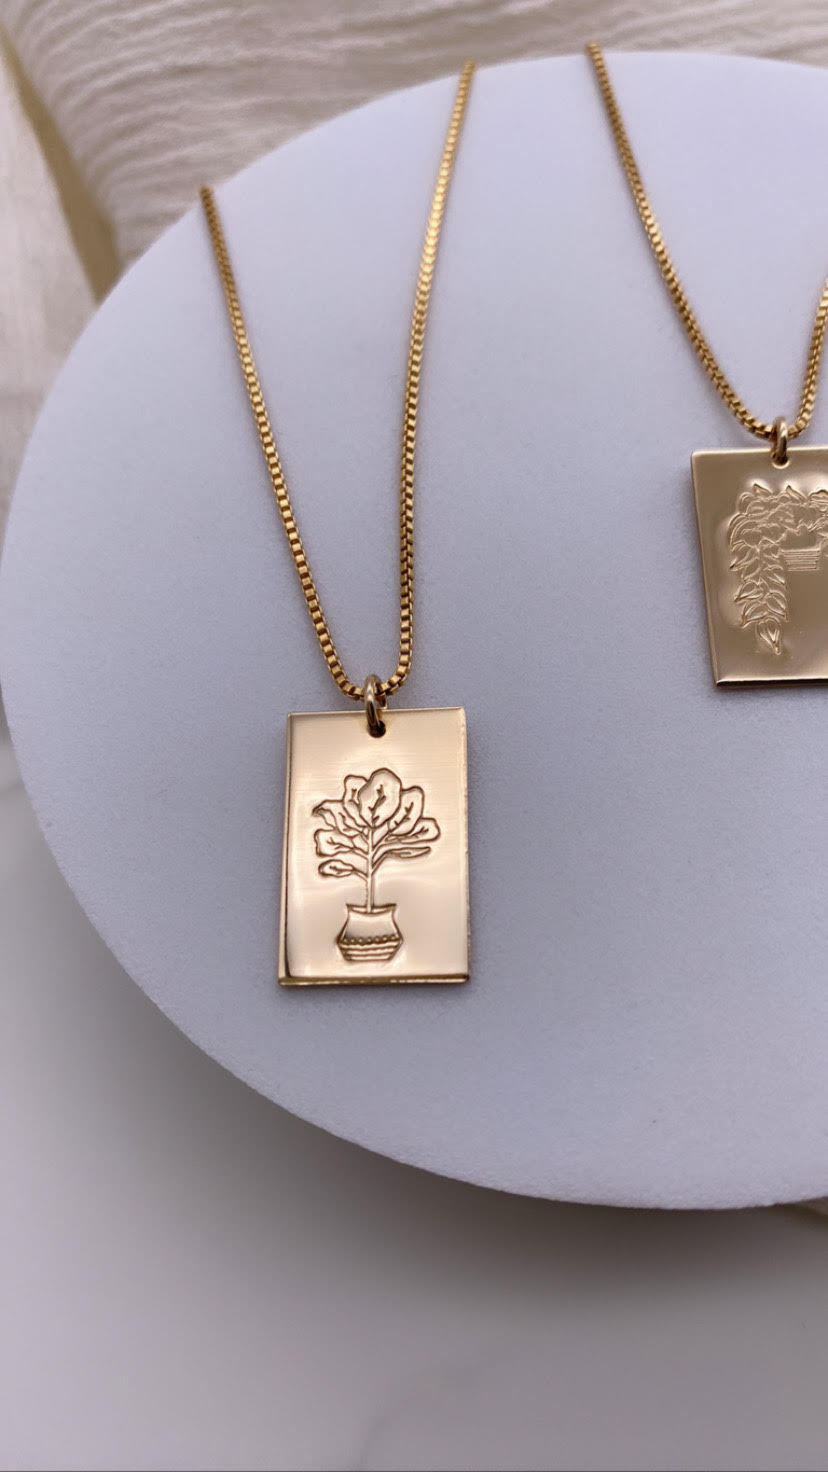 Plant Lover Necklace